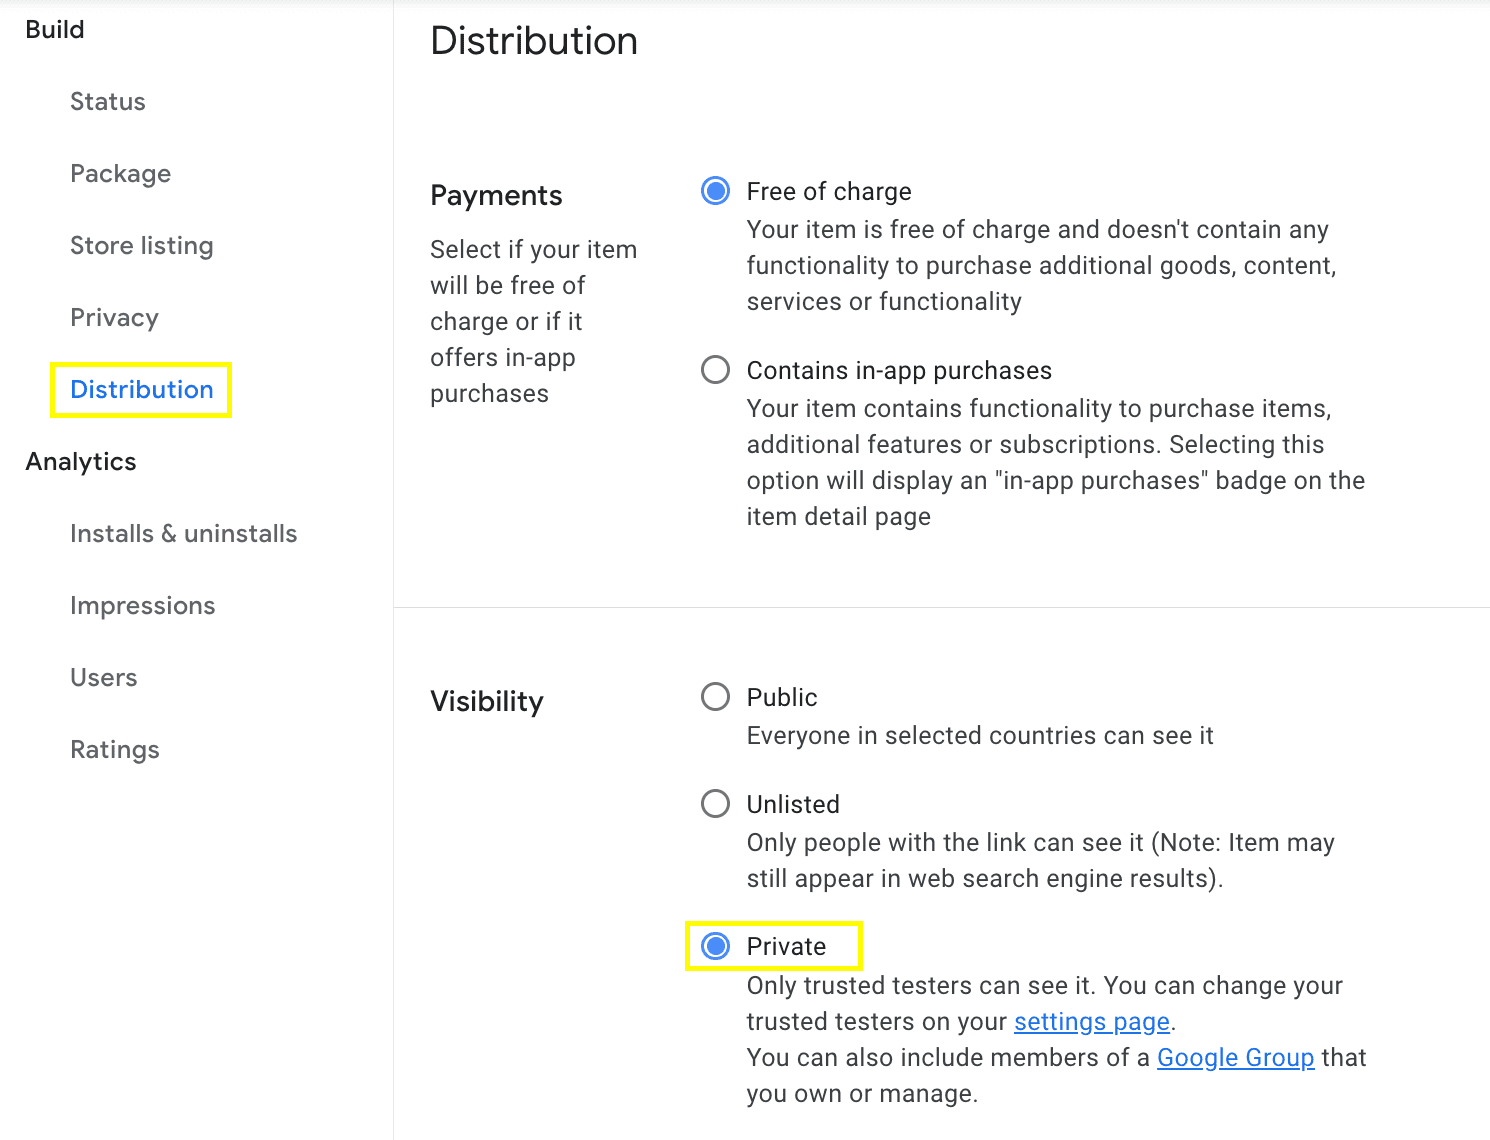 Setting the Visibility as Private in the Distribution tab